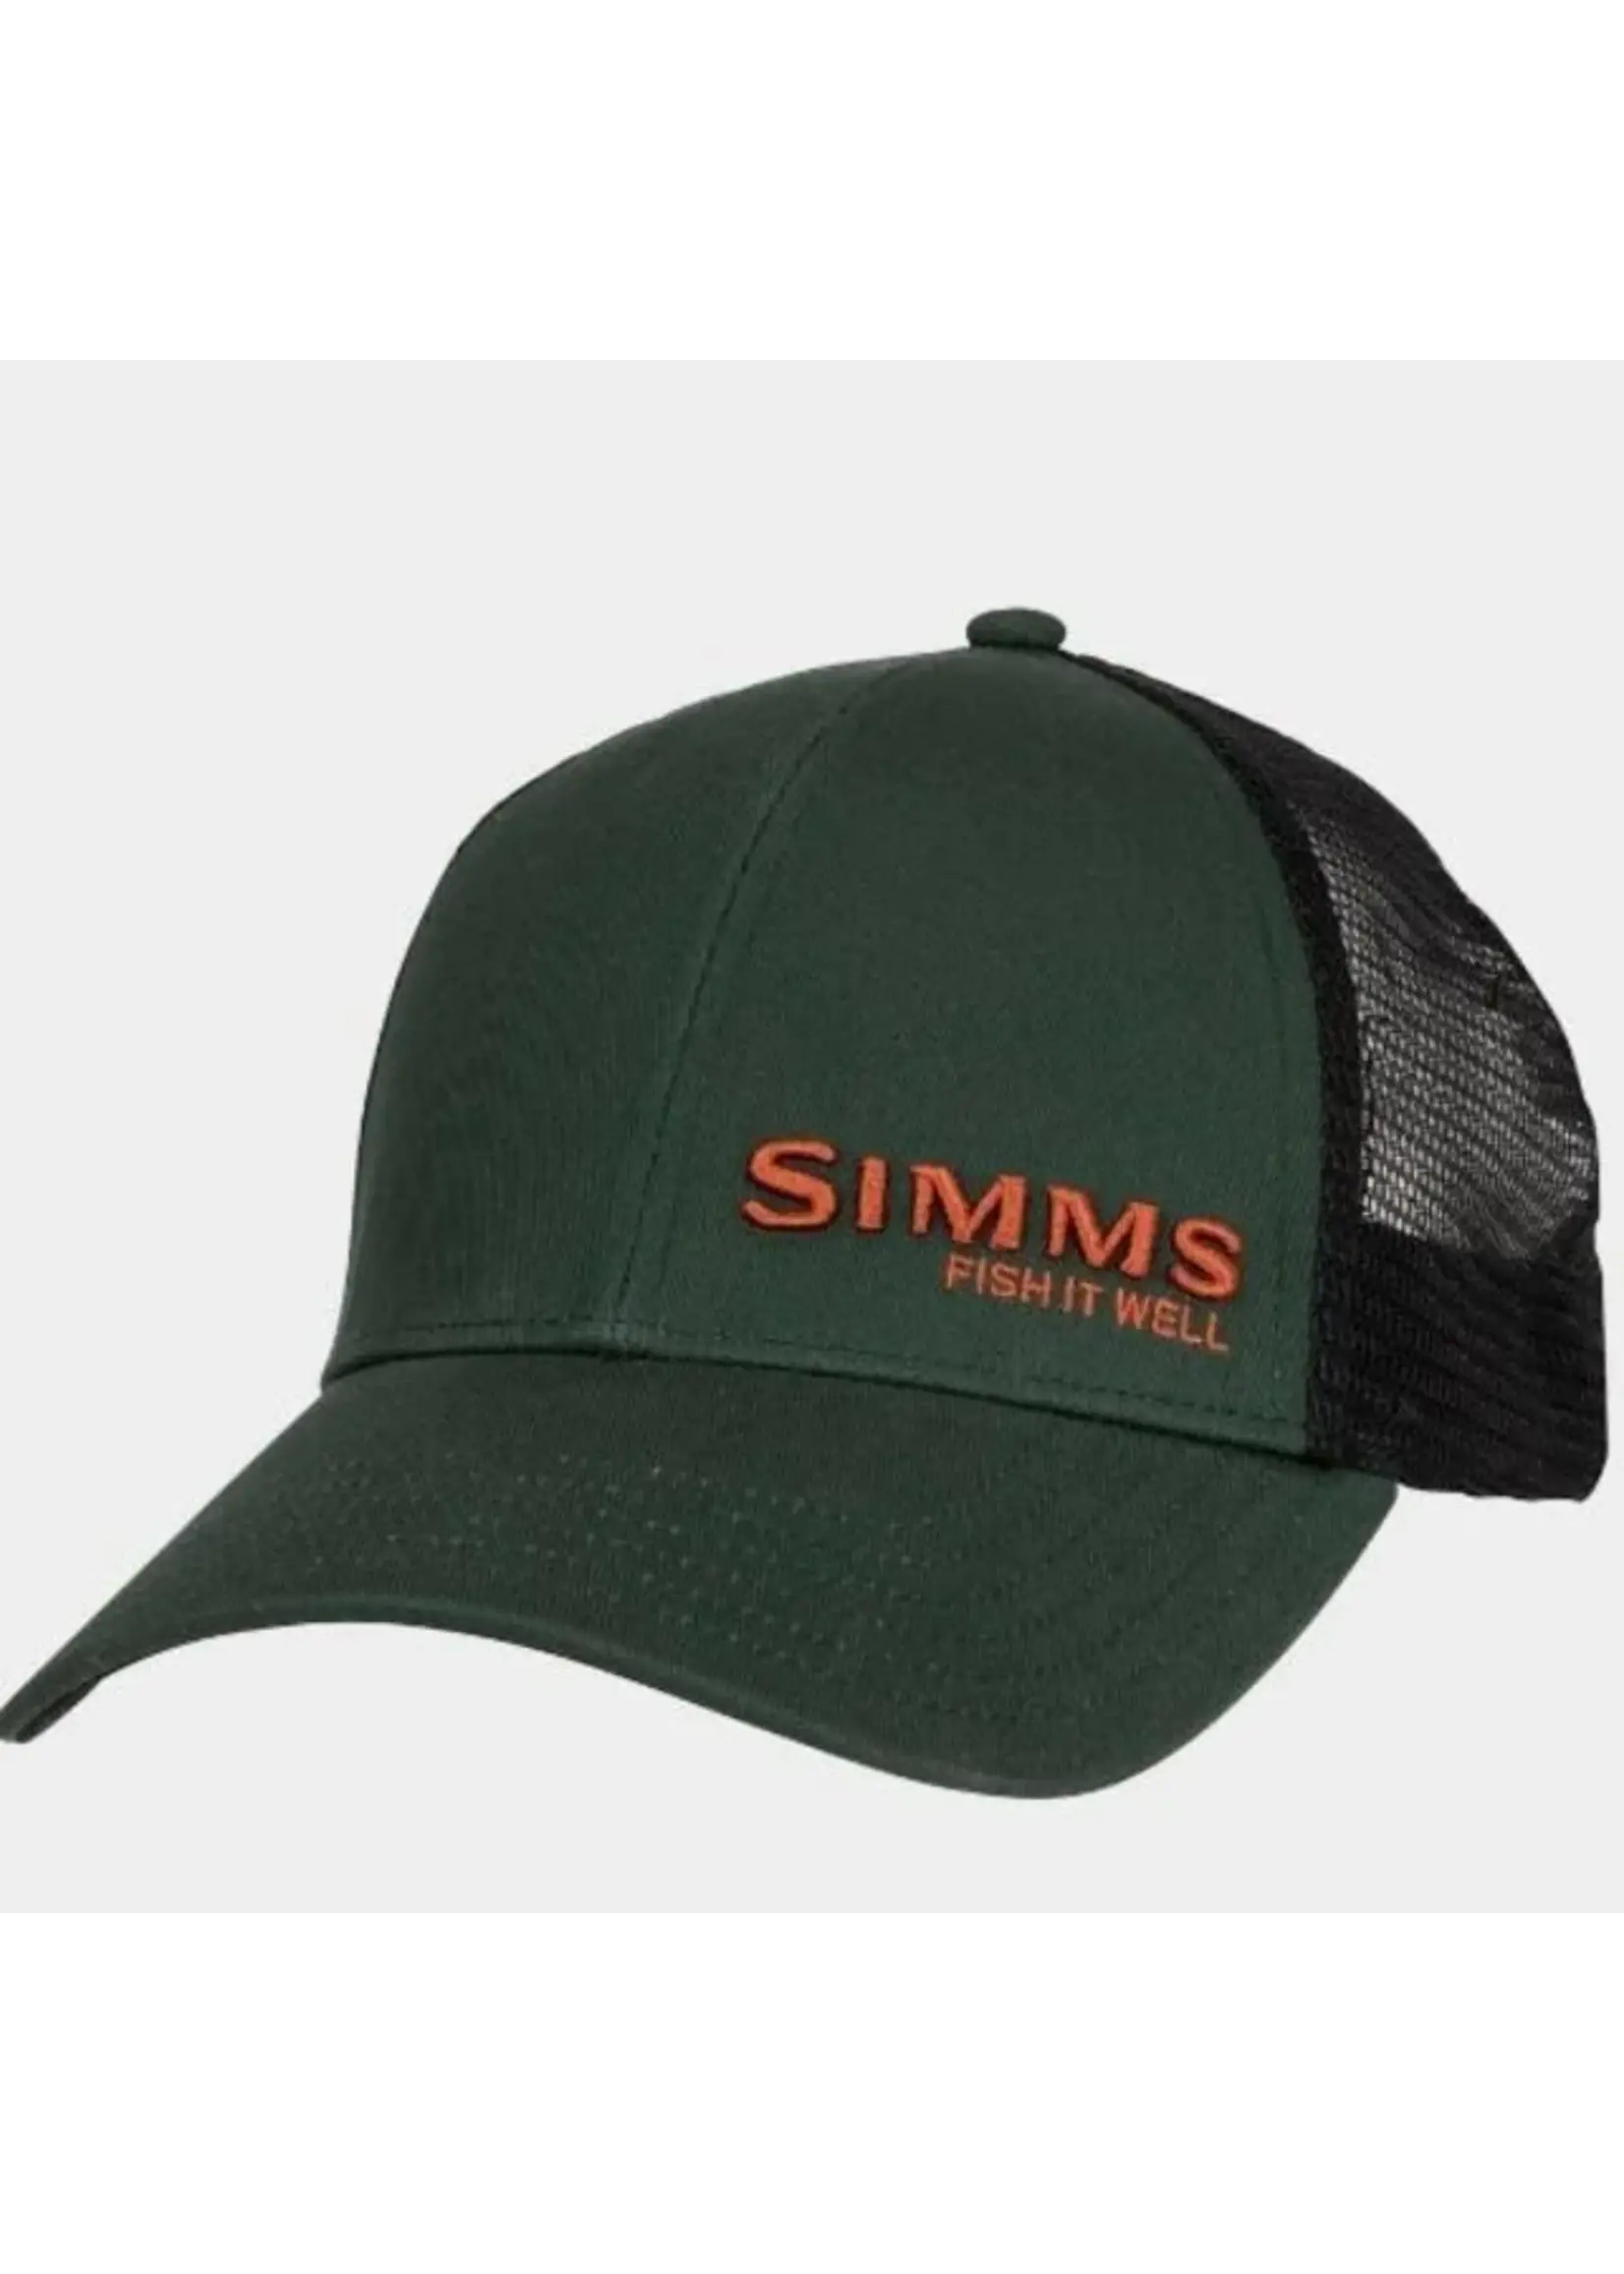 Simms Simms Fish It Well Forever Trucker